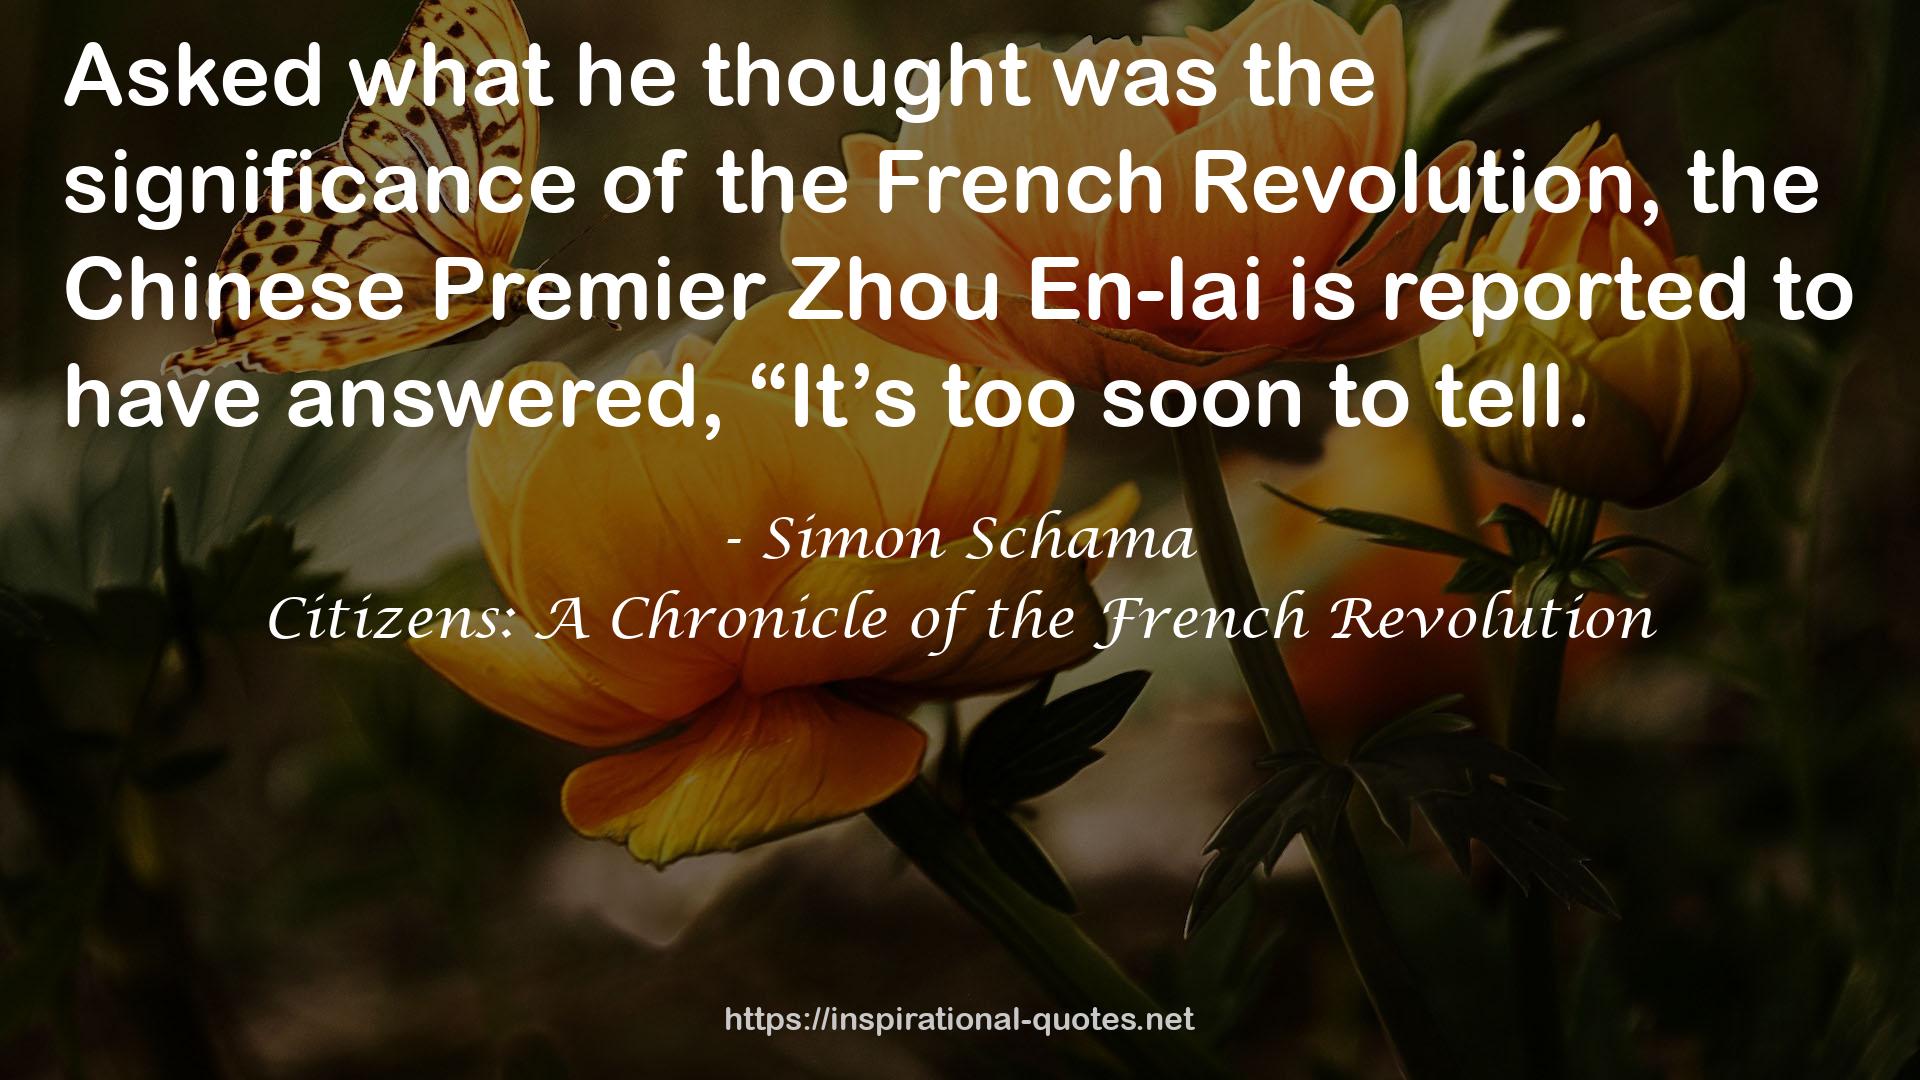 Citizens: A Chronicle of the French Revolution QUOTES